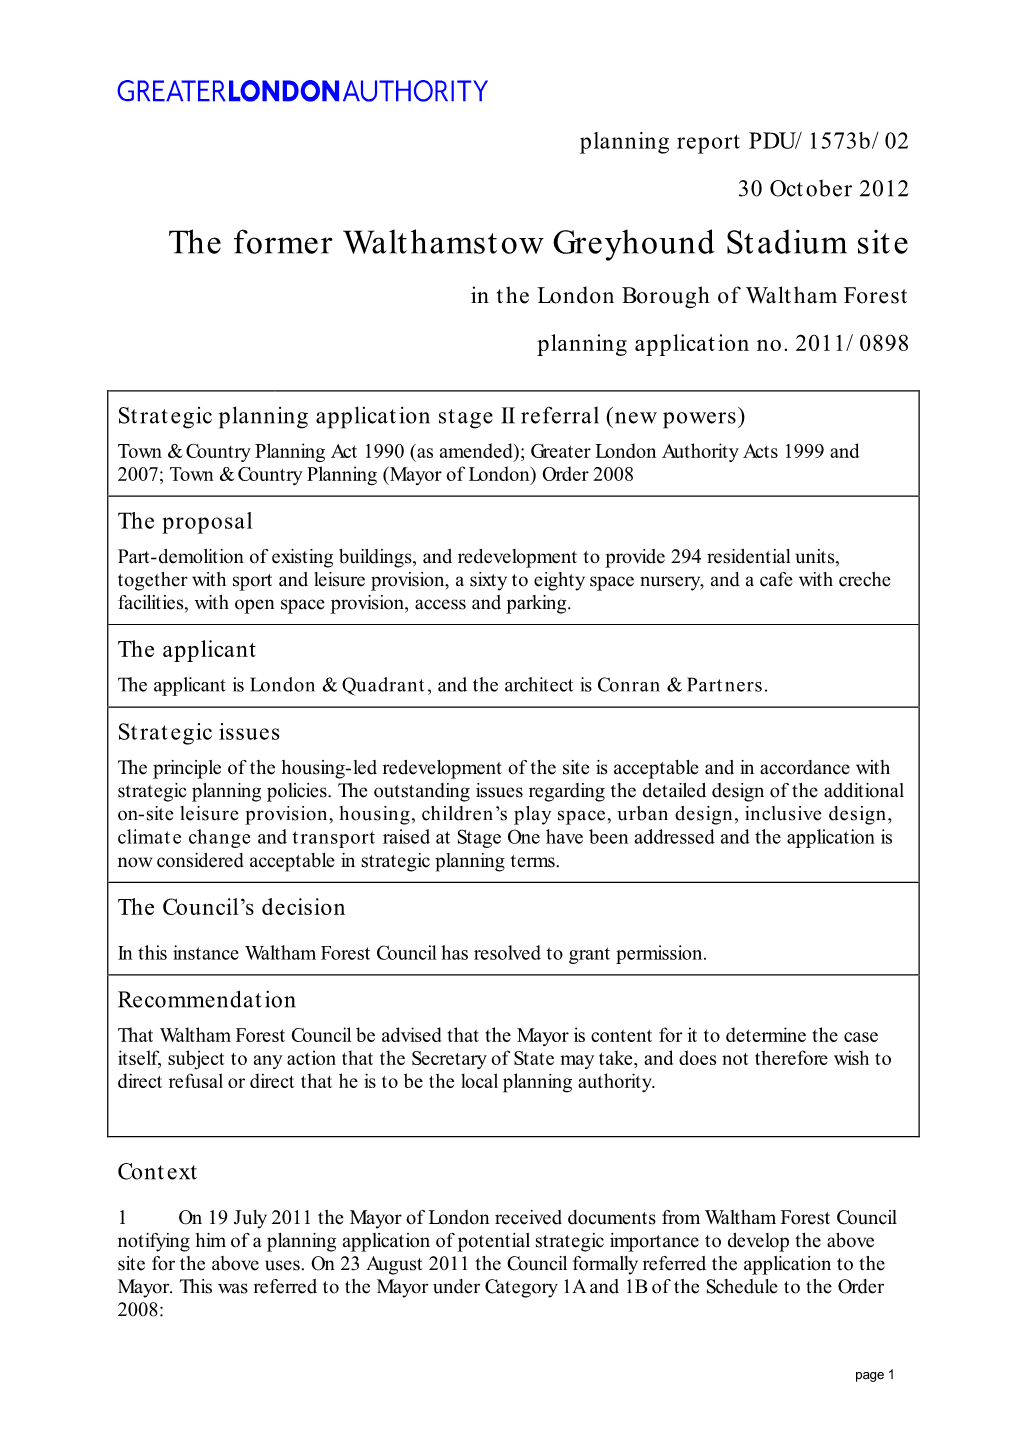 The Former Walthamstow Greyhound Stadium Site in the London Borough of Waltham Forest Planning Application No